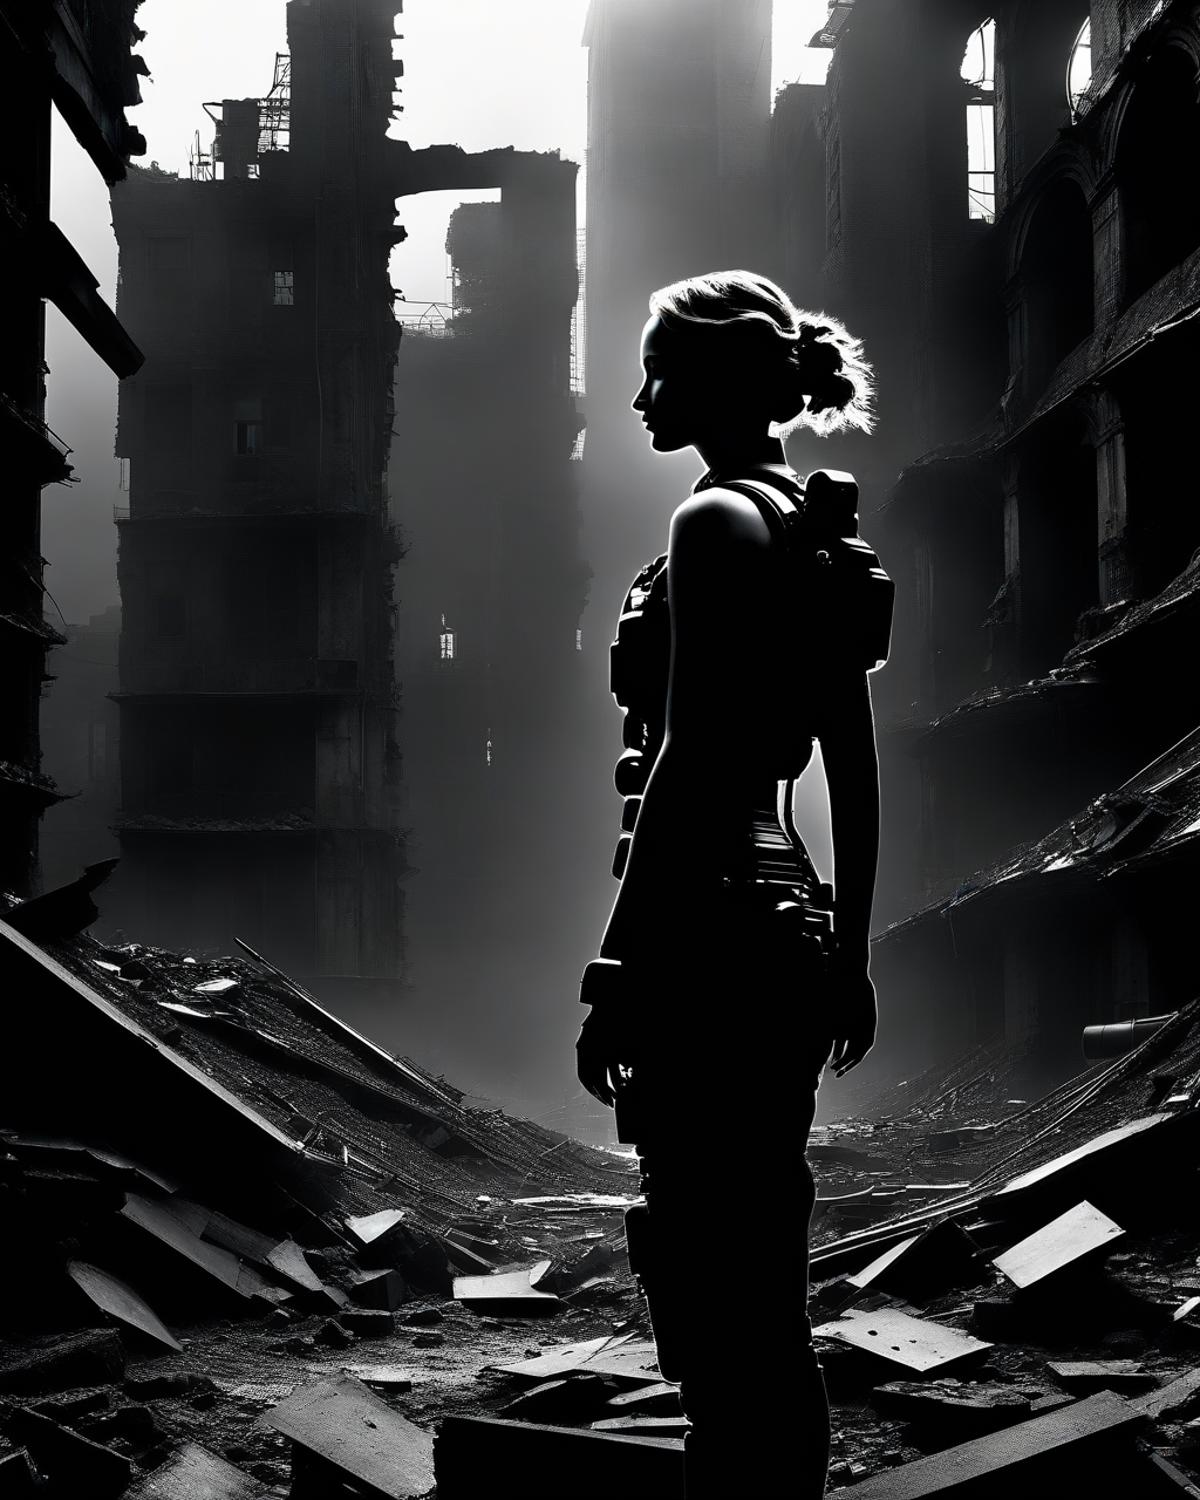 A woman in a black and white photo with a ponytail, standing in a destroyed city.